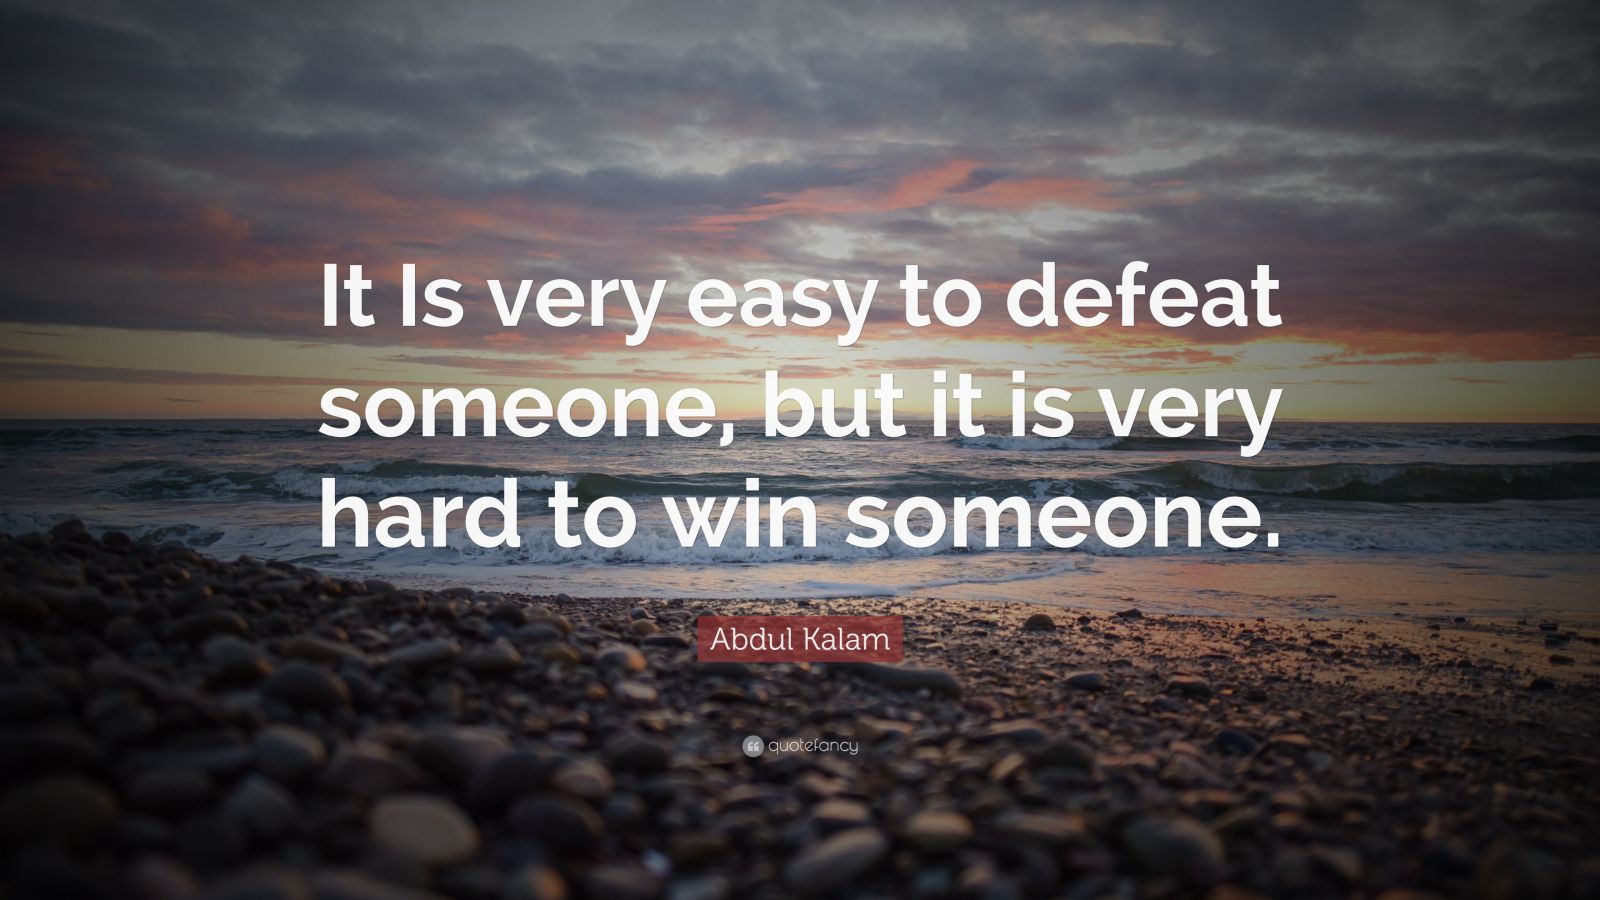 Abdul Kalam Quote: “It Is very easy to defeat someone, but it is very